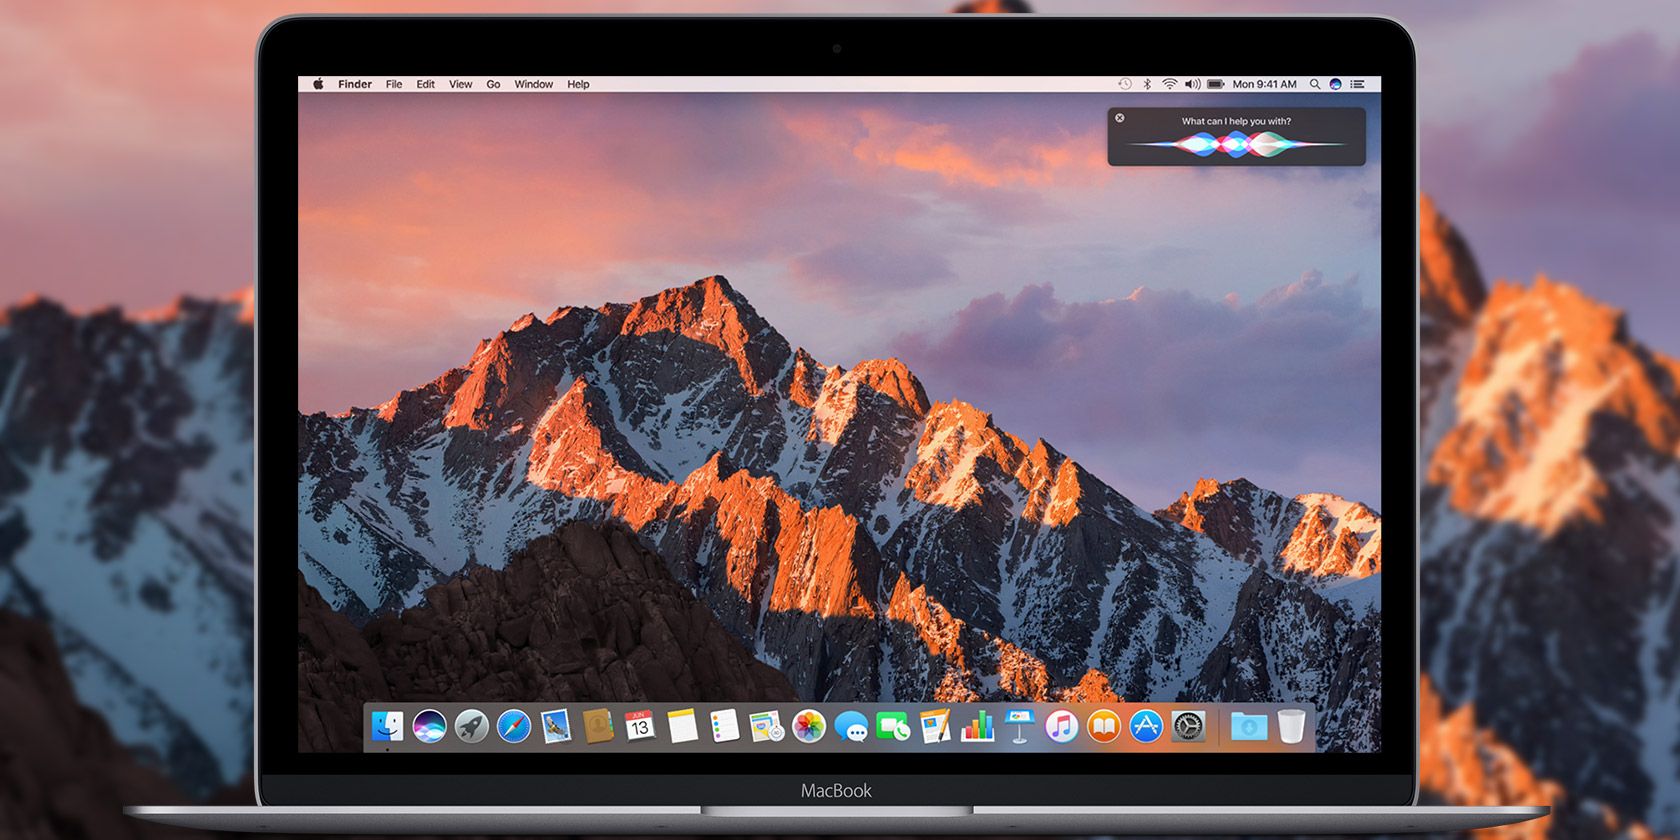 What's New in macOS Sierra? The New Features Coming to Your Mac